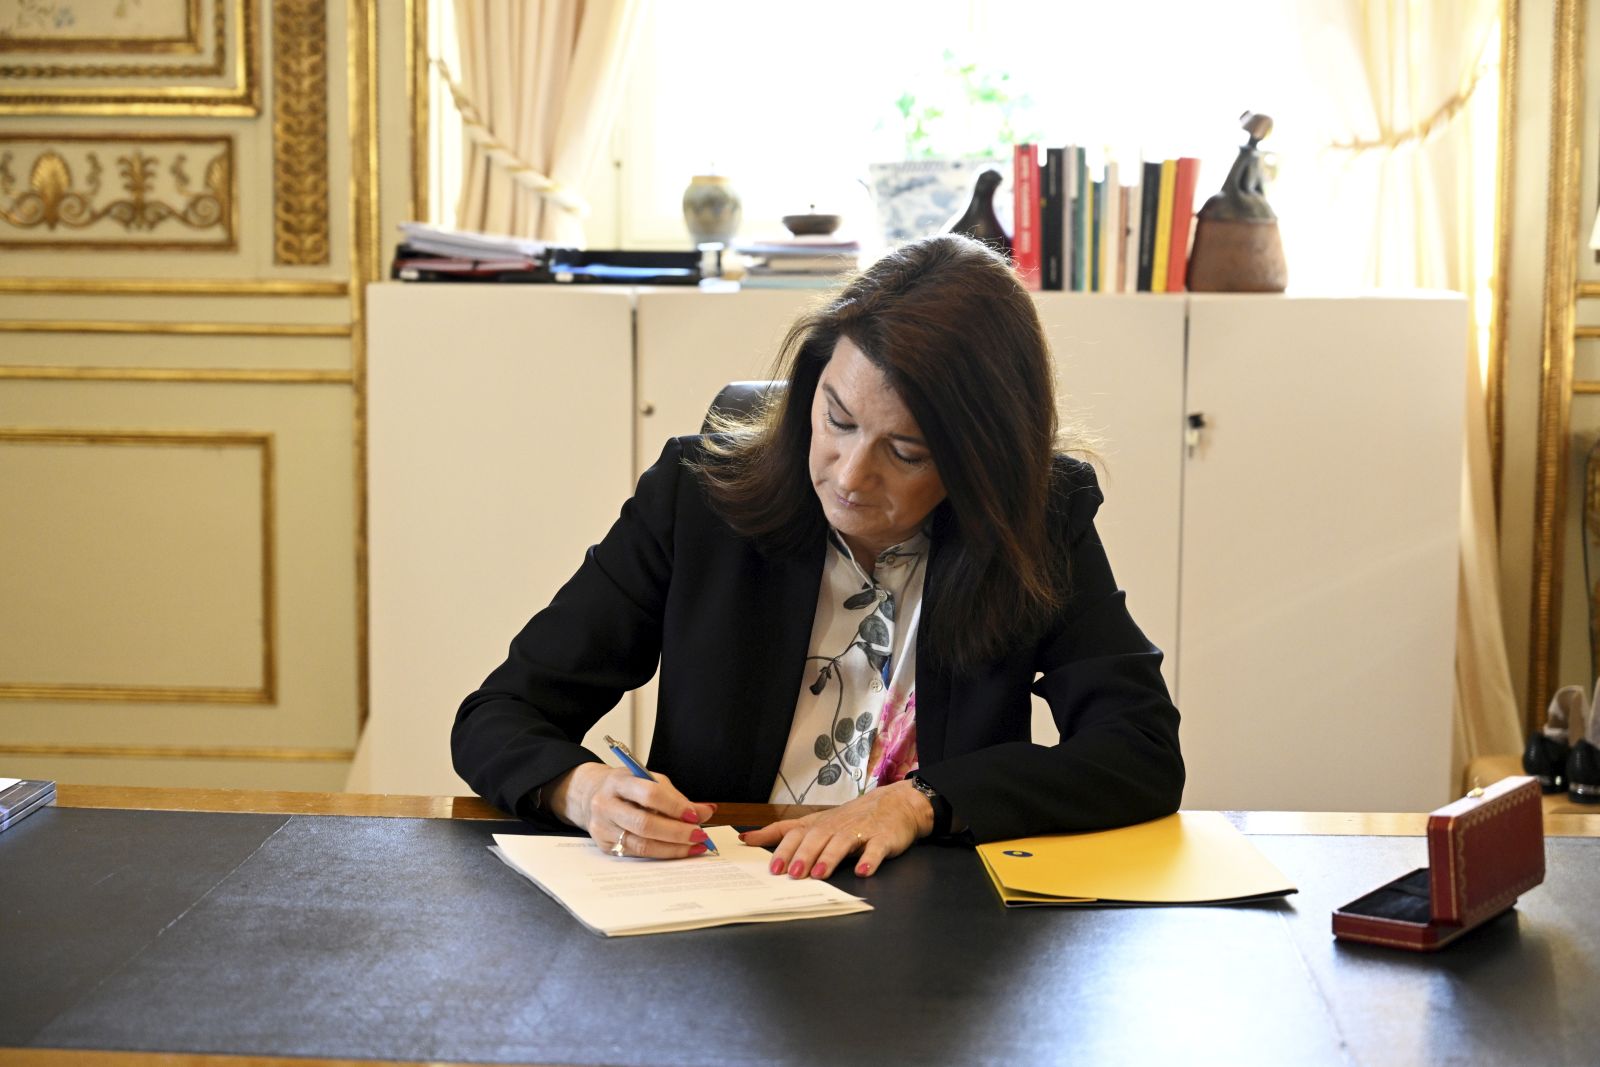 epa09952060 Sweden's Minister of Foreign Affairs Ann Linde signs Sweden's application for NATO membership at the Ministry of Foreign Affairs in Stockholm, Sweden, 17 May 2022. The Swedish Parliament the previous day held a special debate about applying for NATO membership. The leaders of Sweden and Finland have confirmed they will apply for NATO membership as a result of Russia's invasion of Ukraine.  EPA/Henrik Montgomery  SWEDEN OUT